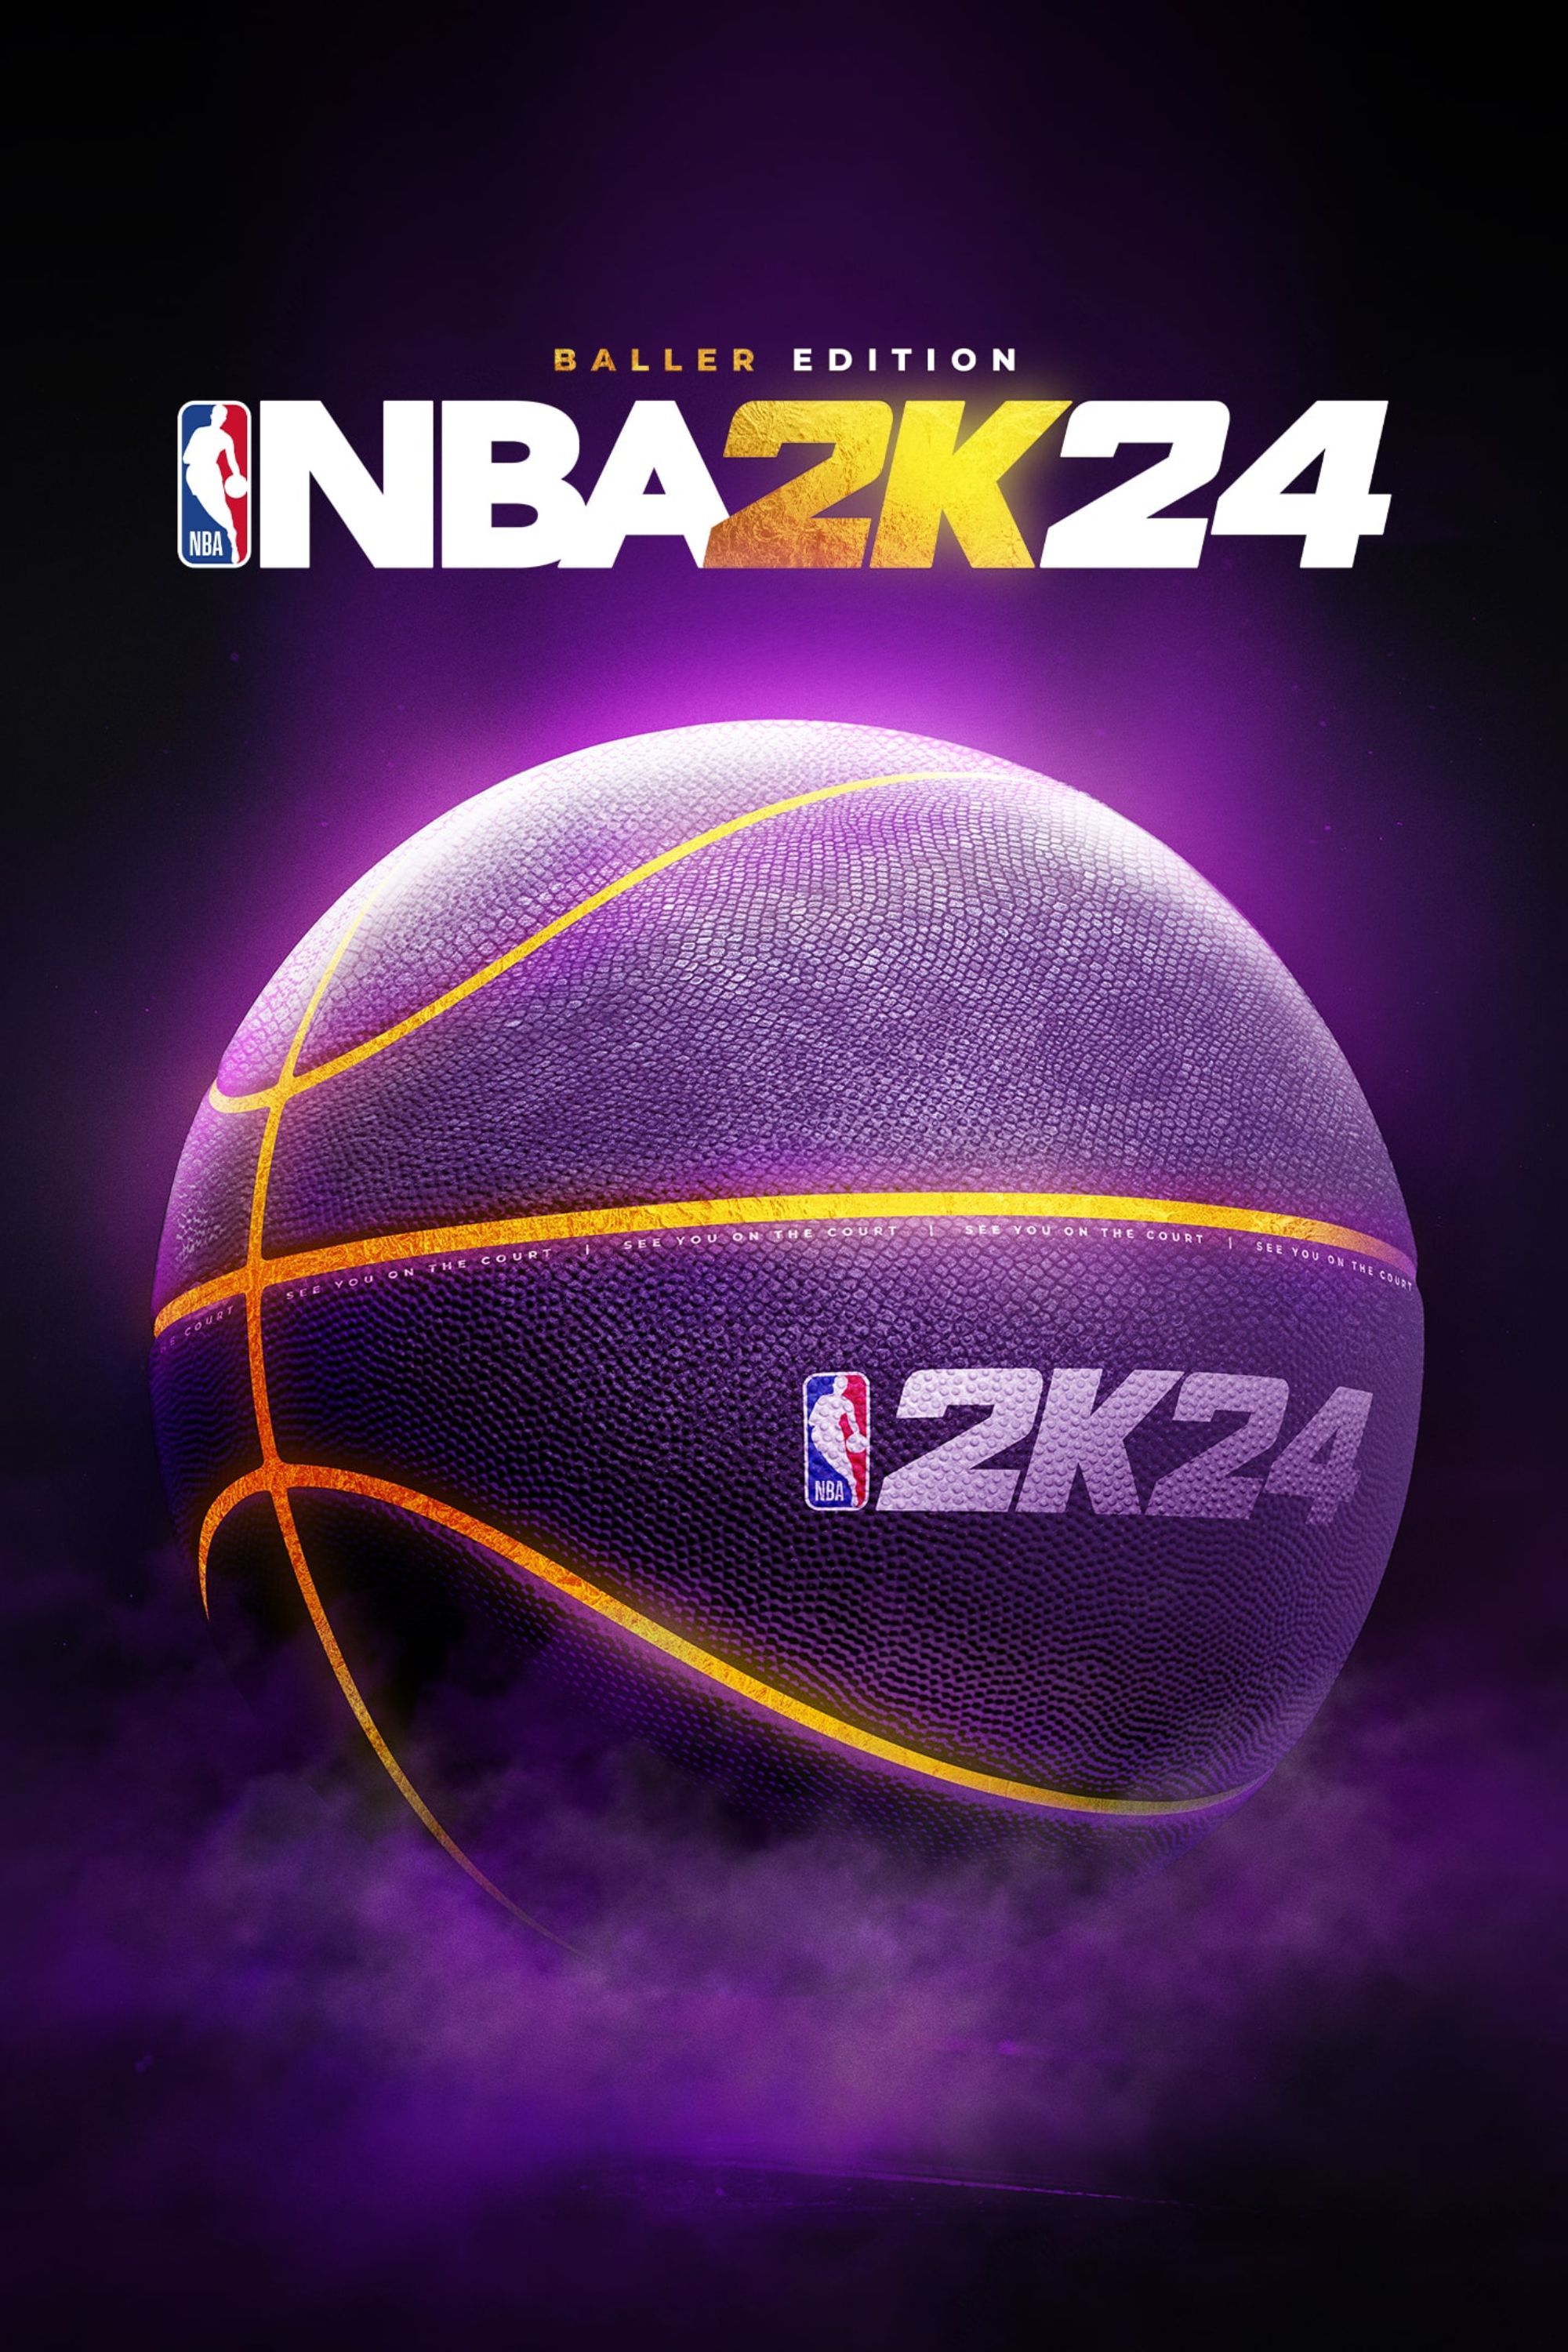 NBA 2K24 Baller Edition Cover With NBA 2K24 logo and a purple ball underneath